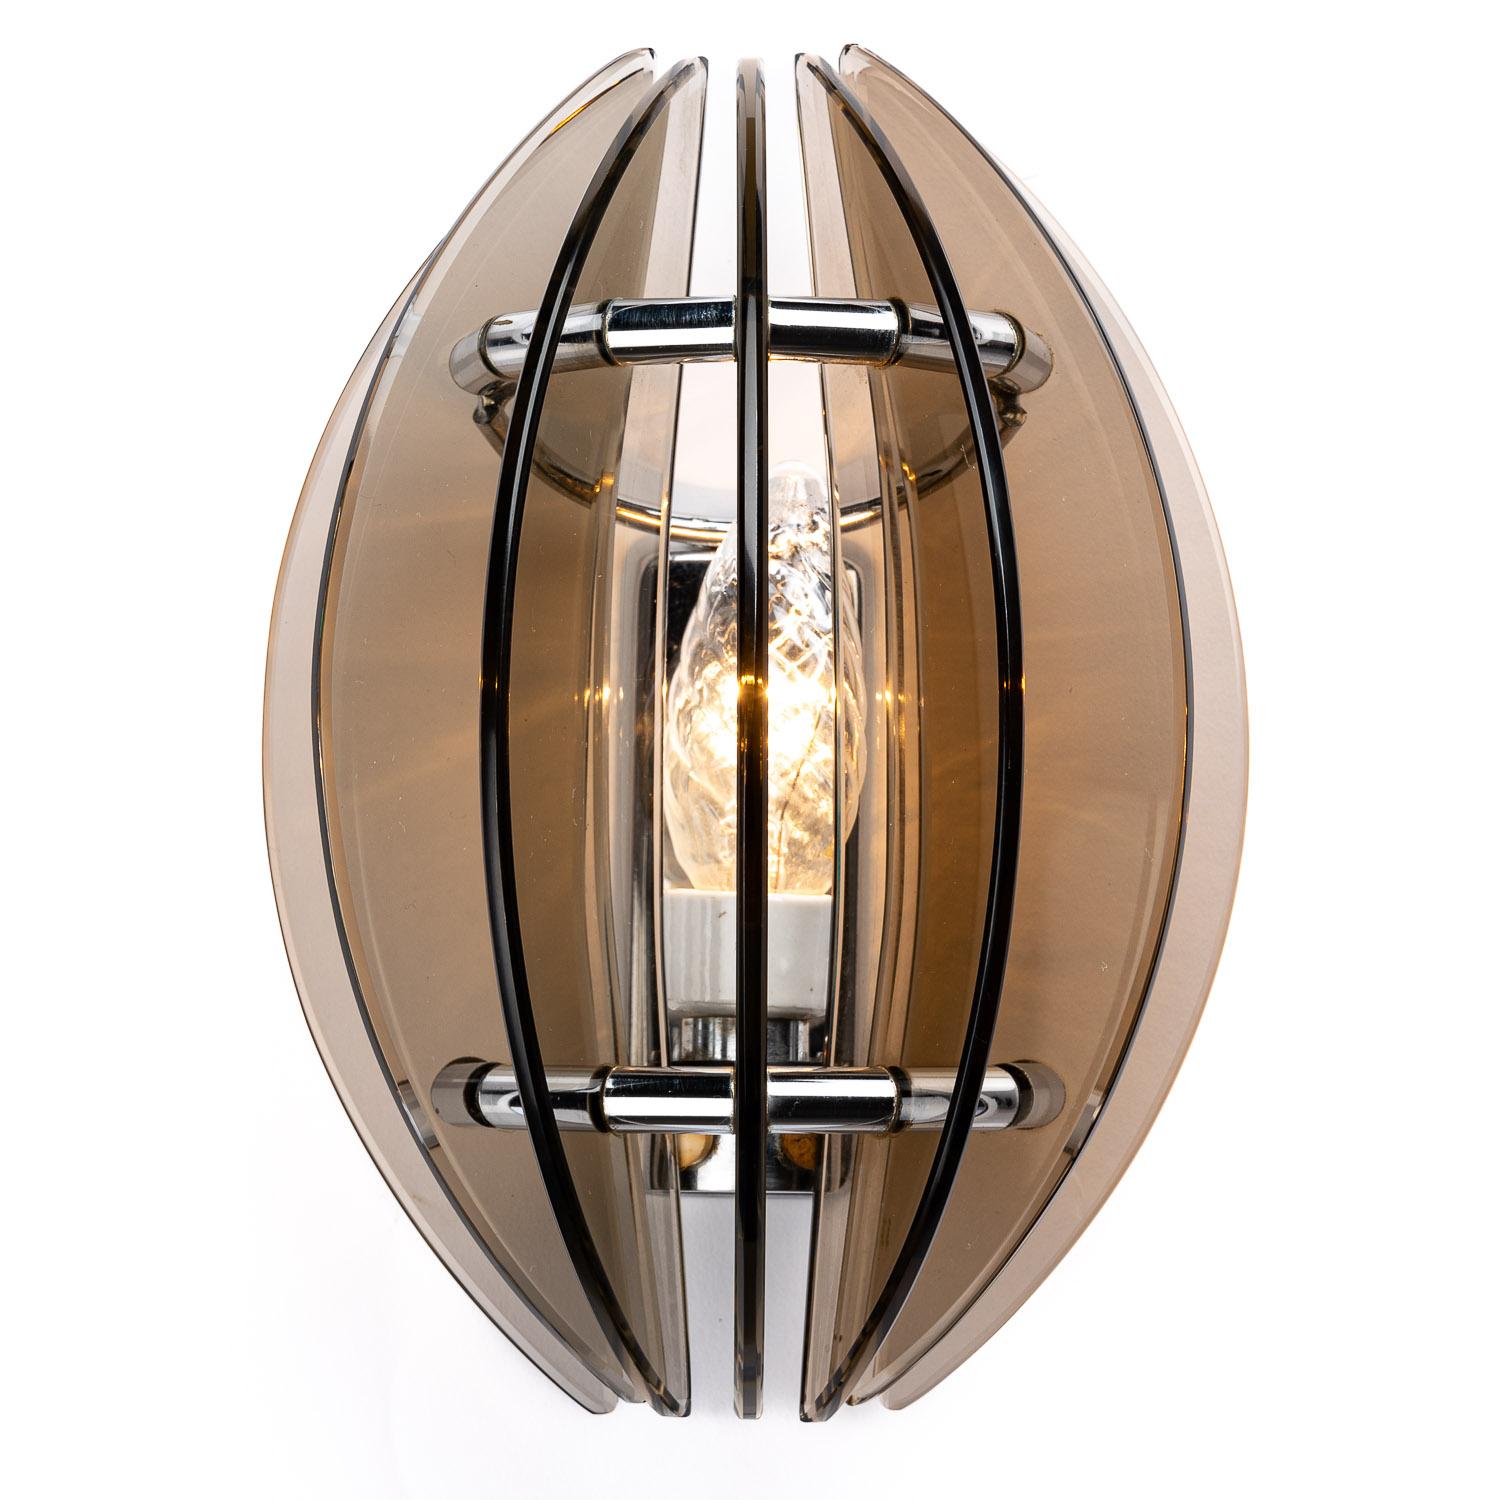 This is a stand-out piece from the designer Veca in Italy. At the cutting-edge of 1970s design, this set of lighting is bold and beautiful. Bladed glass wedges brown in colour, surrounding a single E14 bulb. 

We have four pieces in total. This is